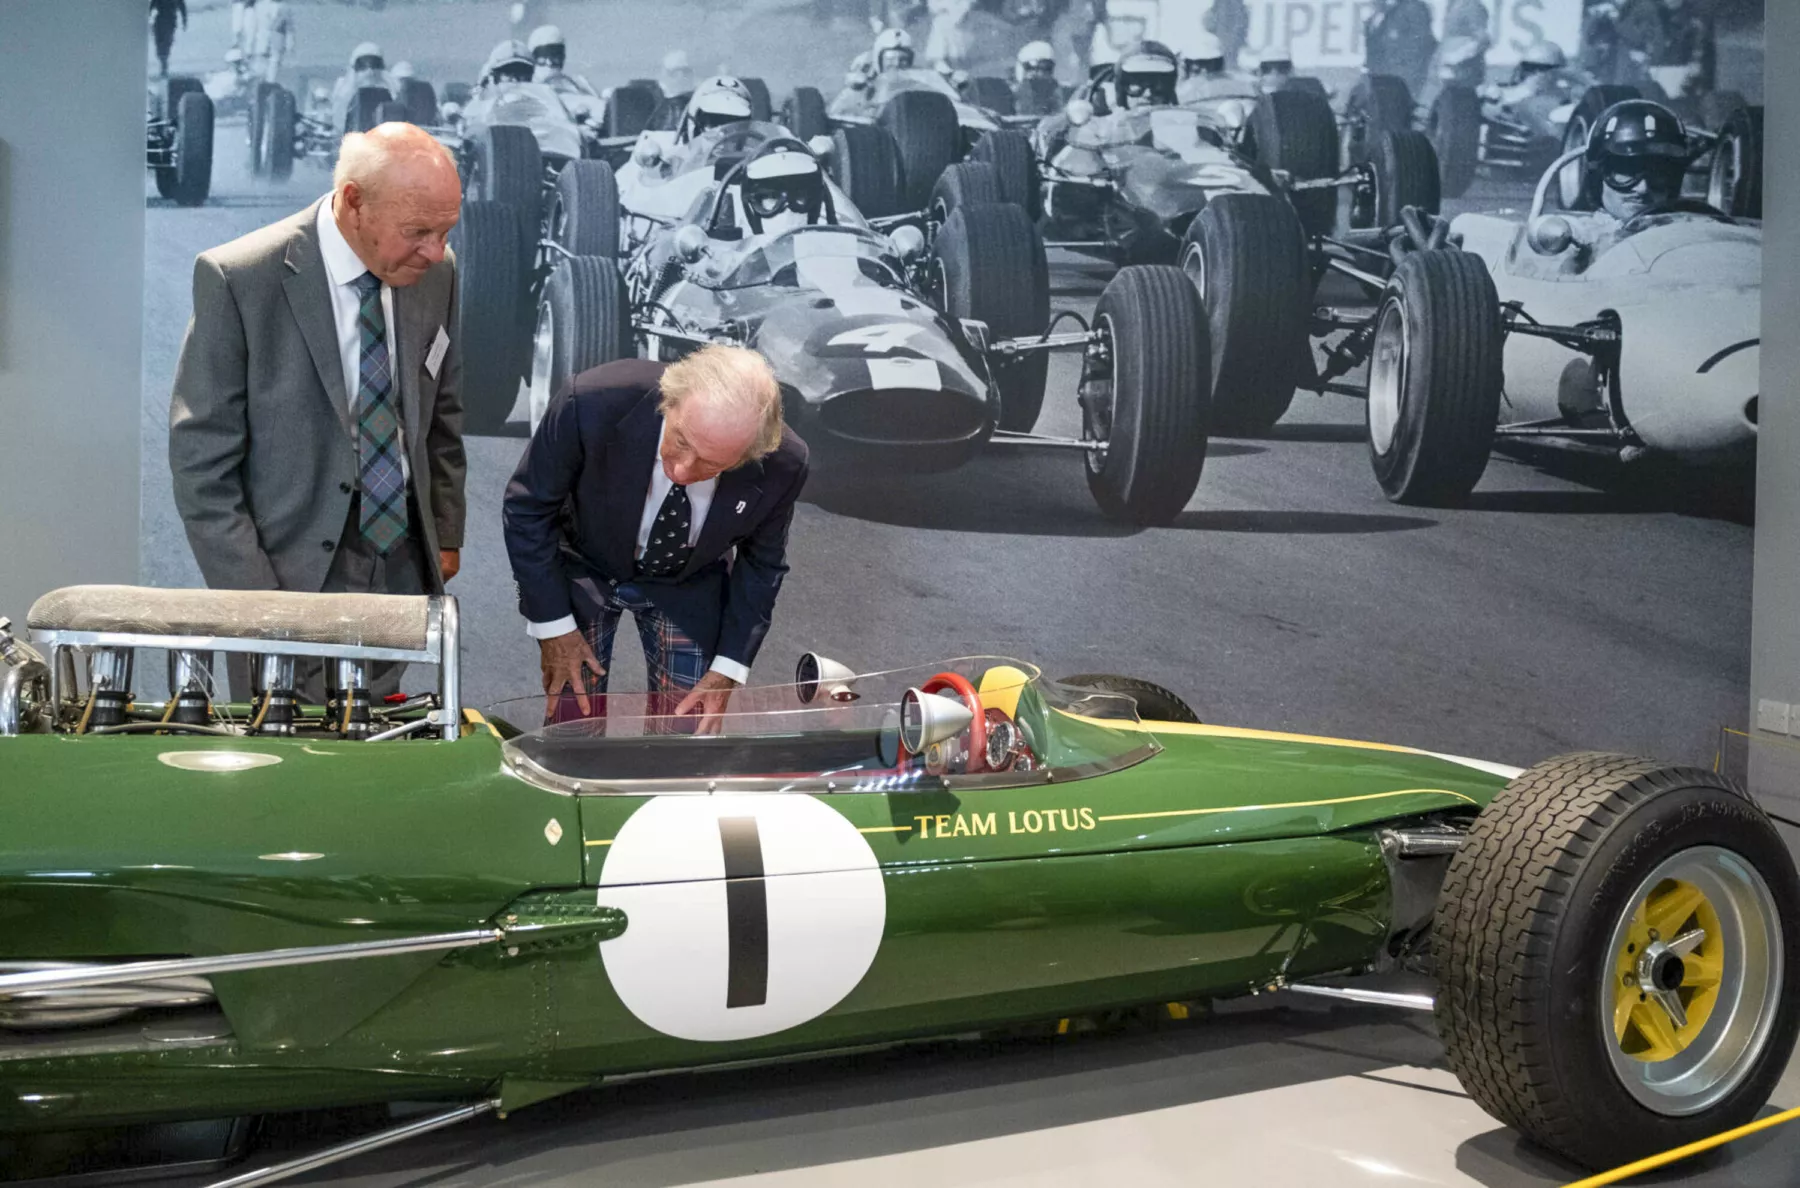 Sir Jackie Stewart examines a green, vintage formula one Lotus racing car (Lotus 25 R6) which was driven by Jim Clark, at the opening of the Jim Clark Motorsport Museum, Duns, Scotland.